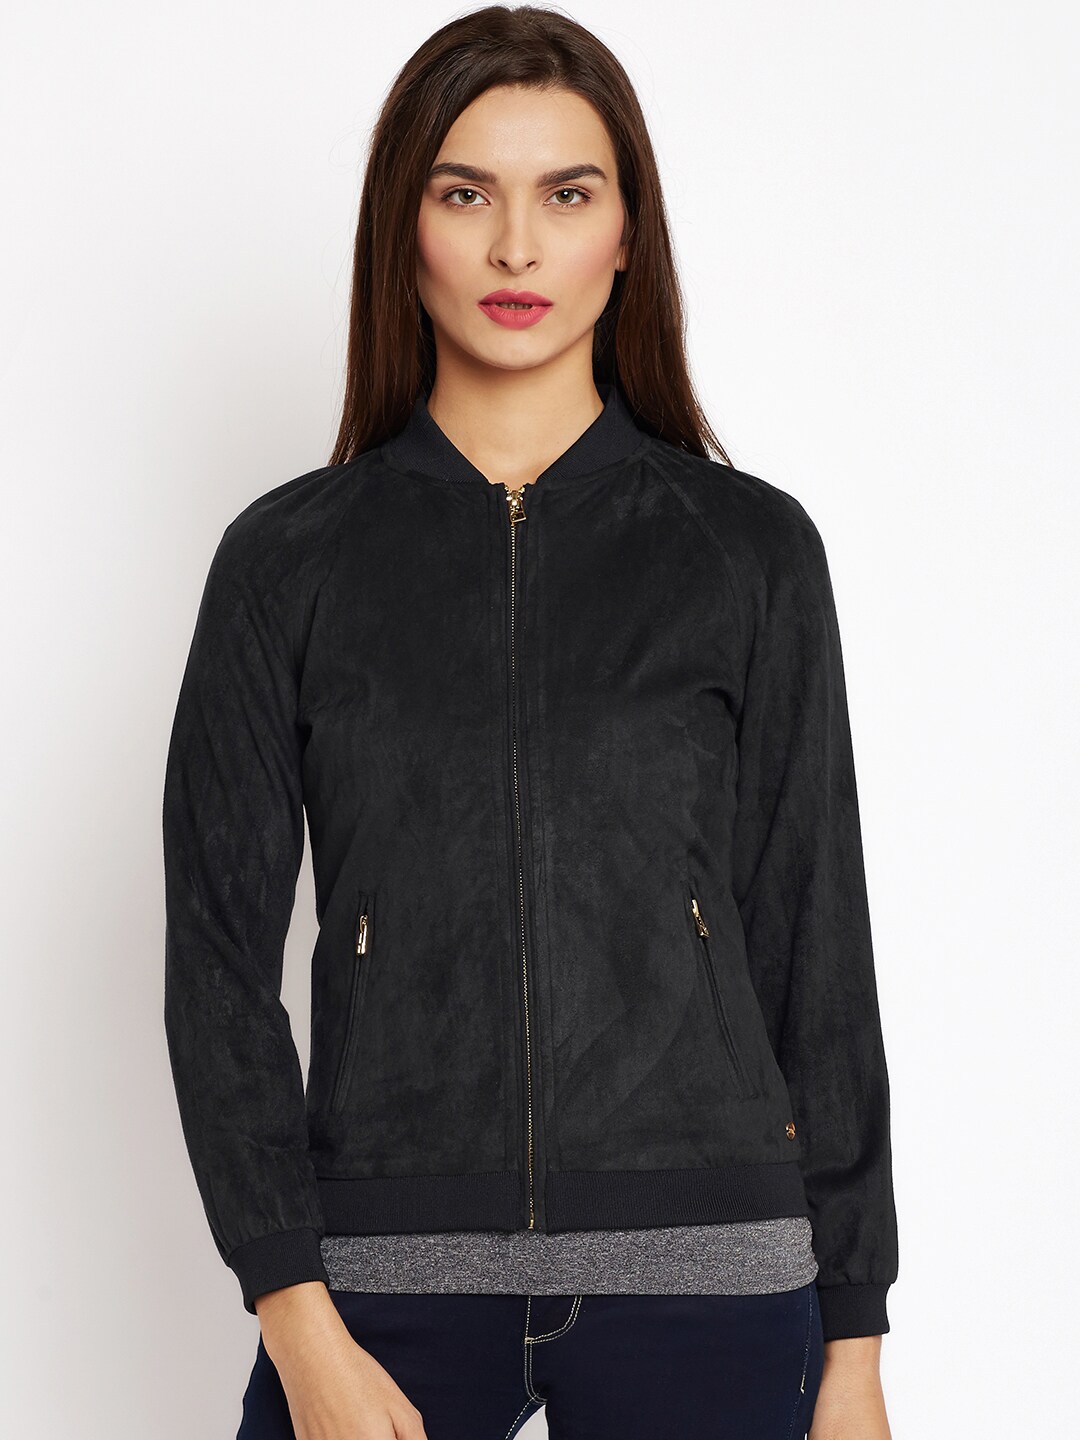 U.S. Polo Assn. Women Black Solid Bomber Jacket Price in India